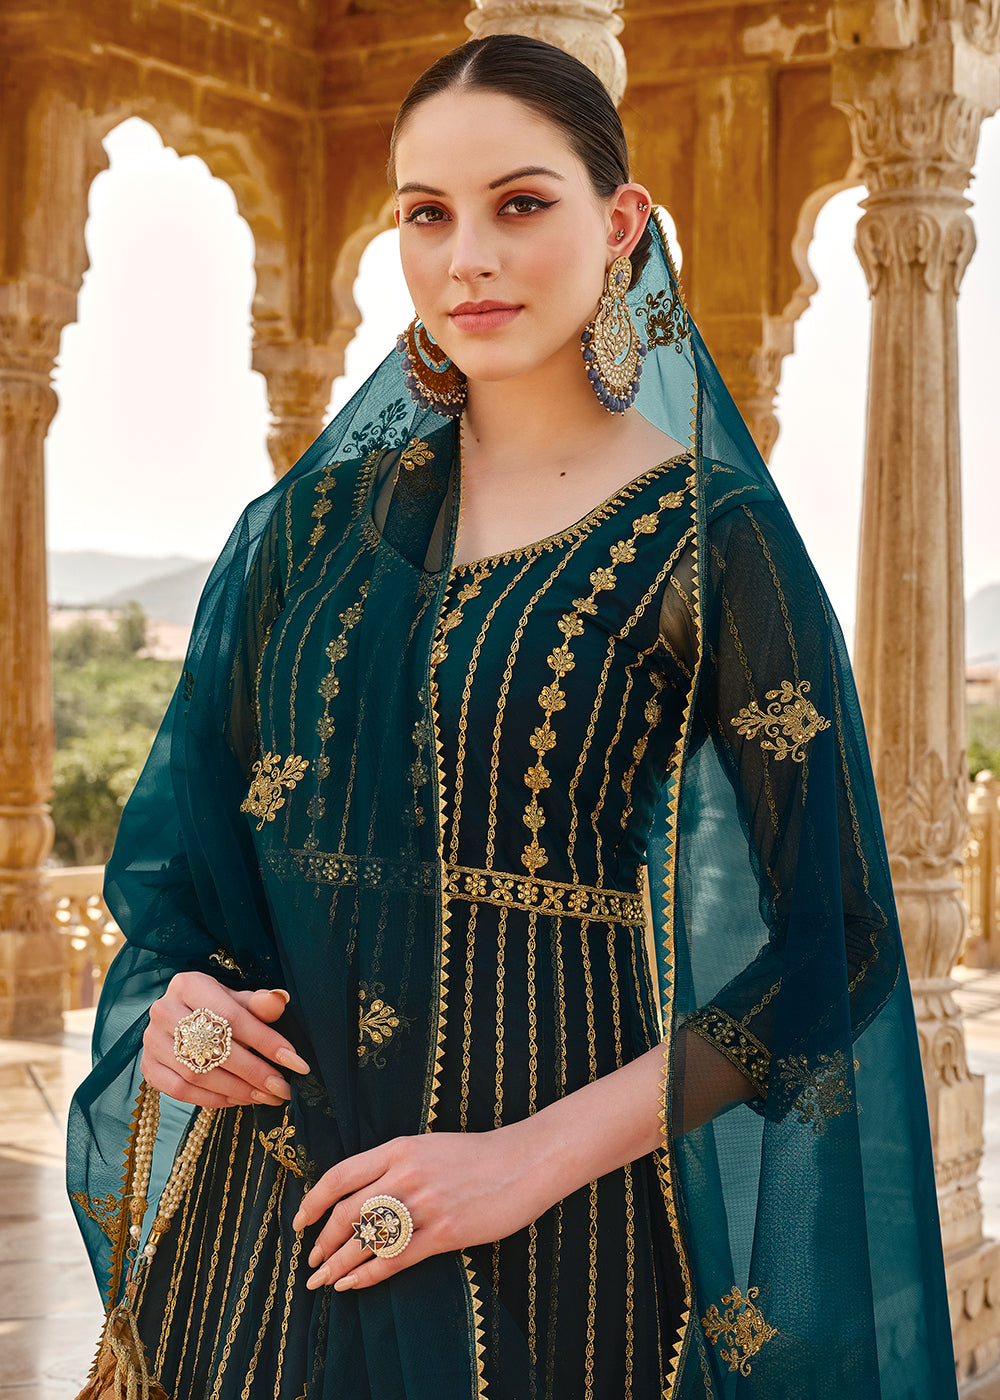 Buy Now Heavy Stone Embroidered Peacock Blue Designer Anarkali Suit Online in USA, UK, Australia, New Zealand, Canada & Worldwide at Empress Clothing.